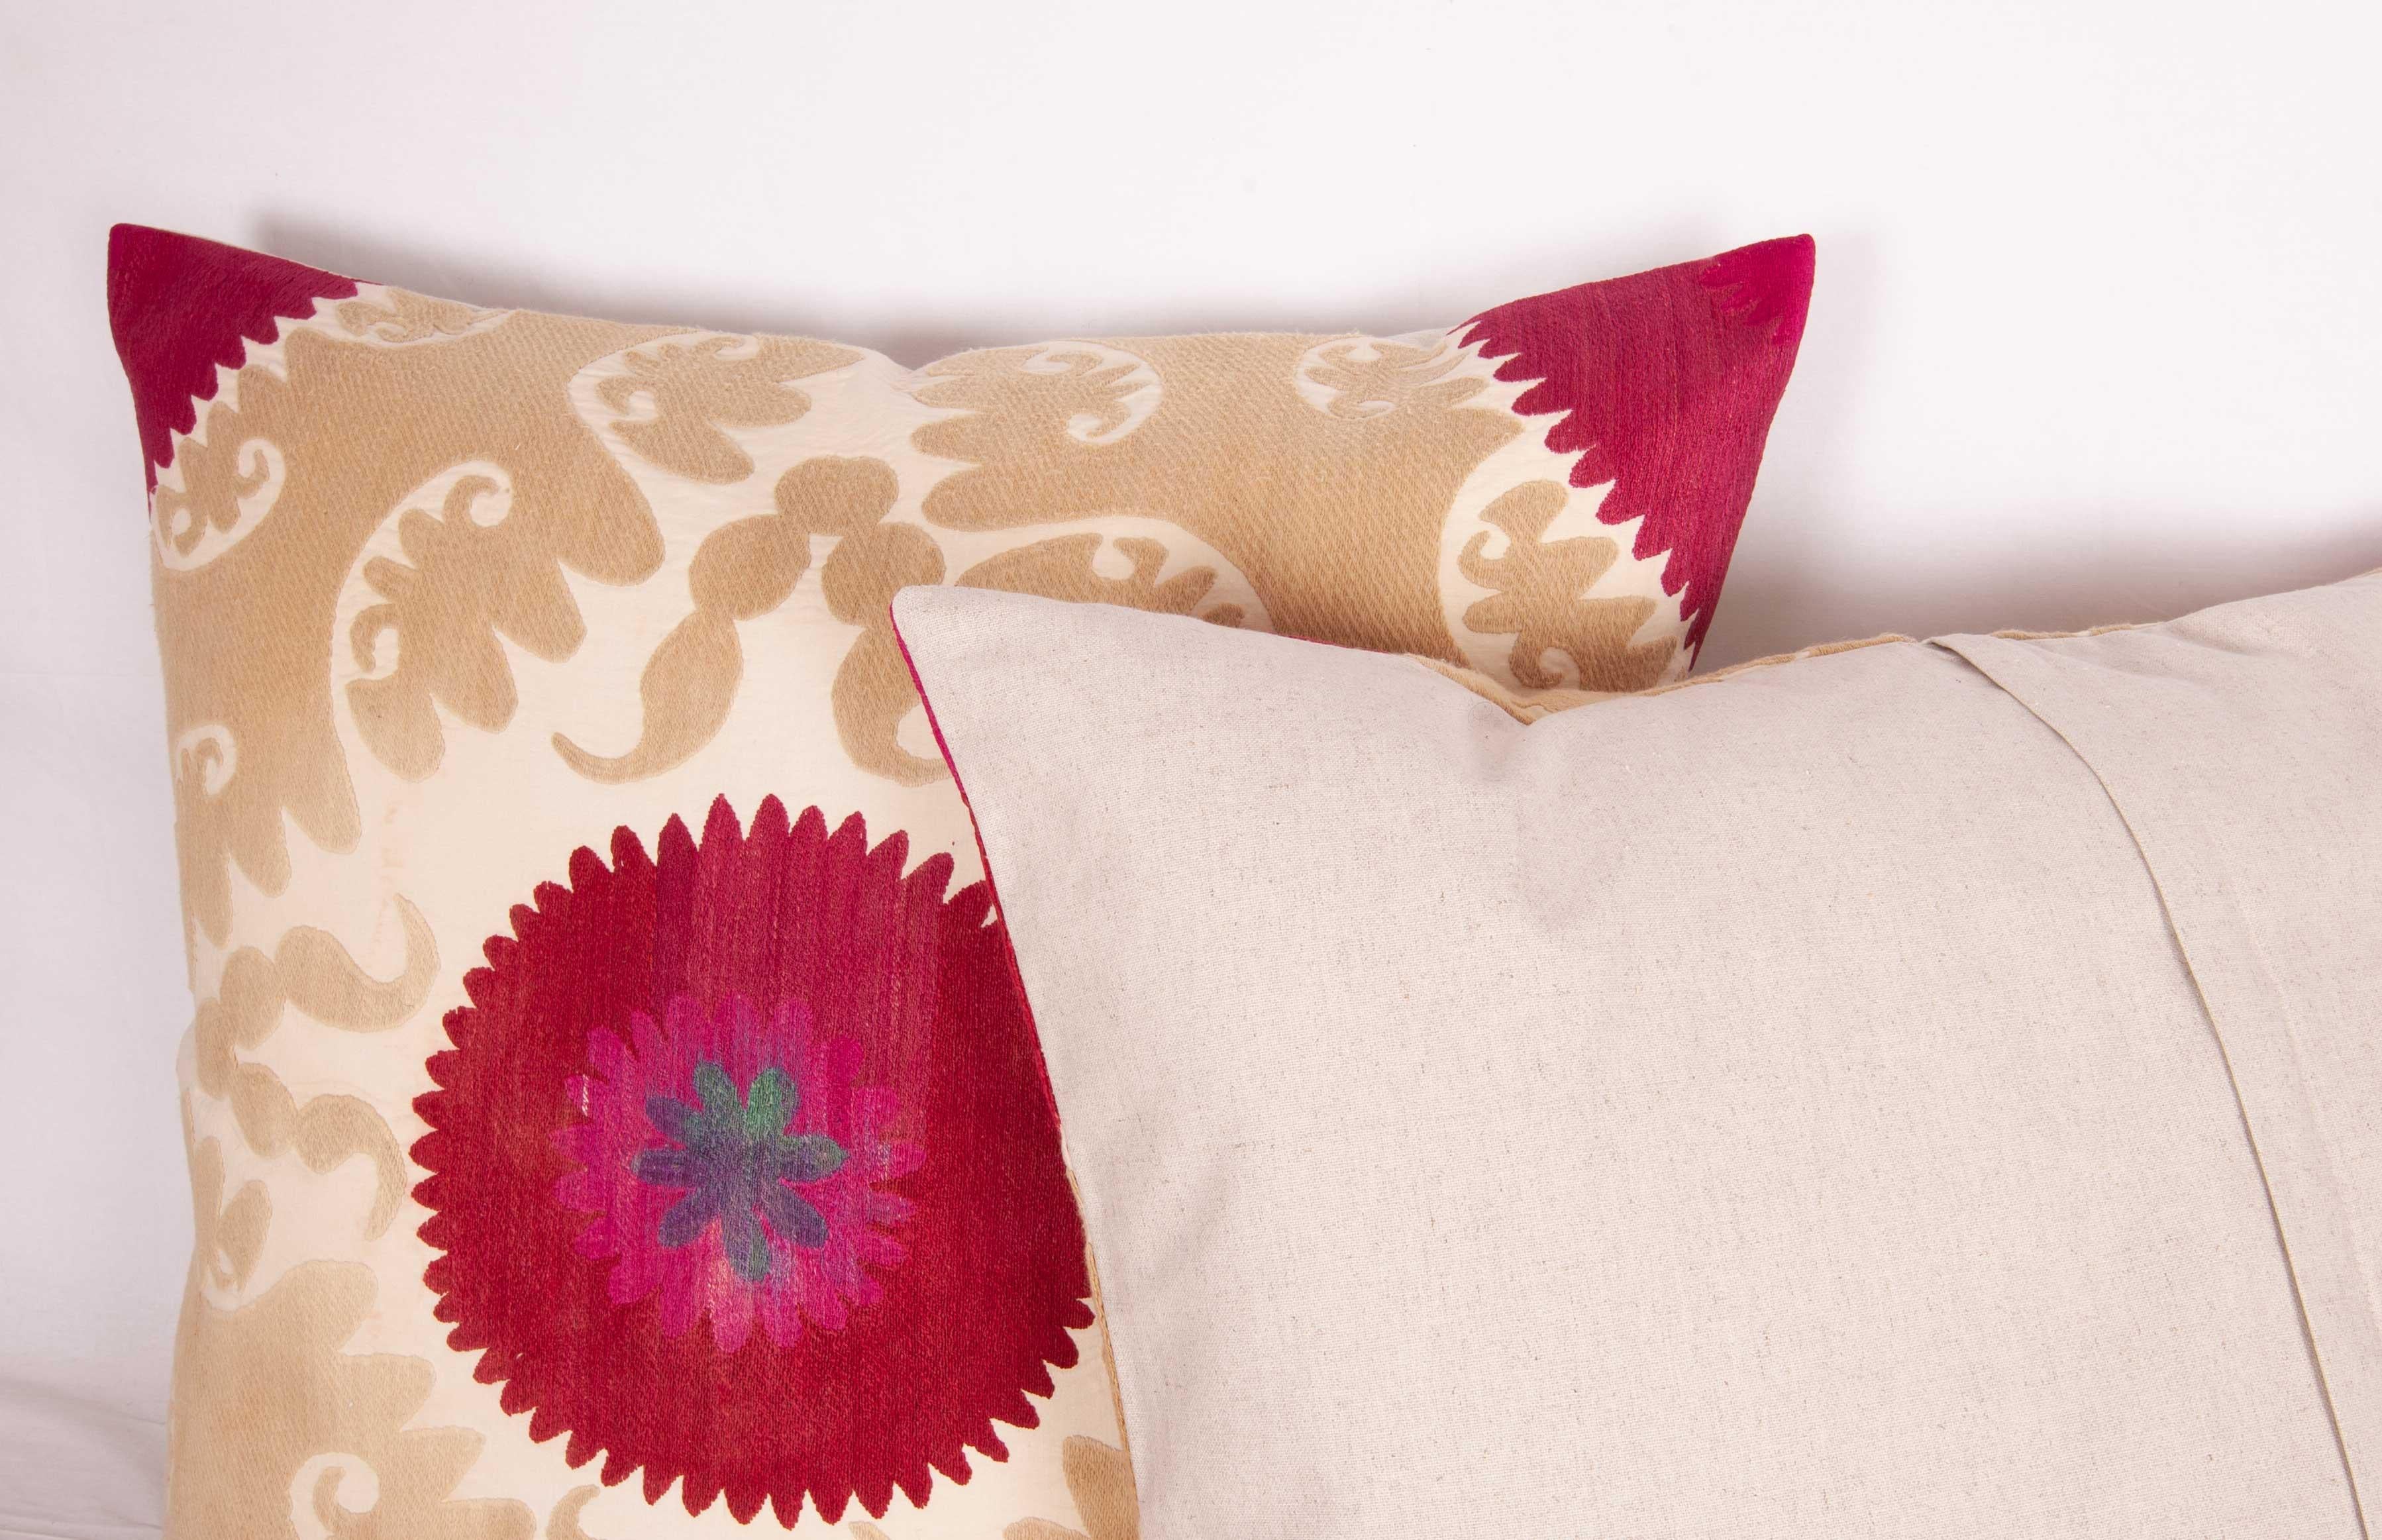 Cotton Suzani Pillow Cases /Cushion Covers Made from a Mid-20th Century Uzbek Suzani